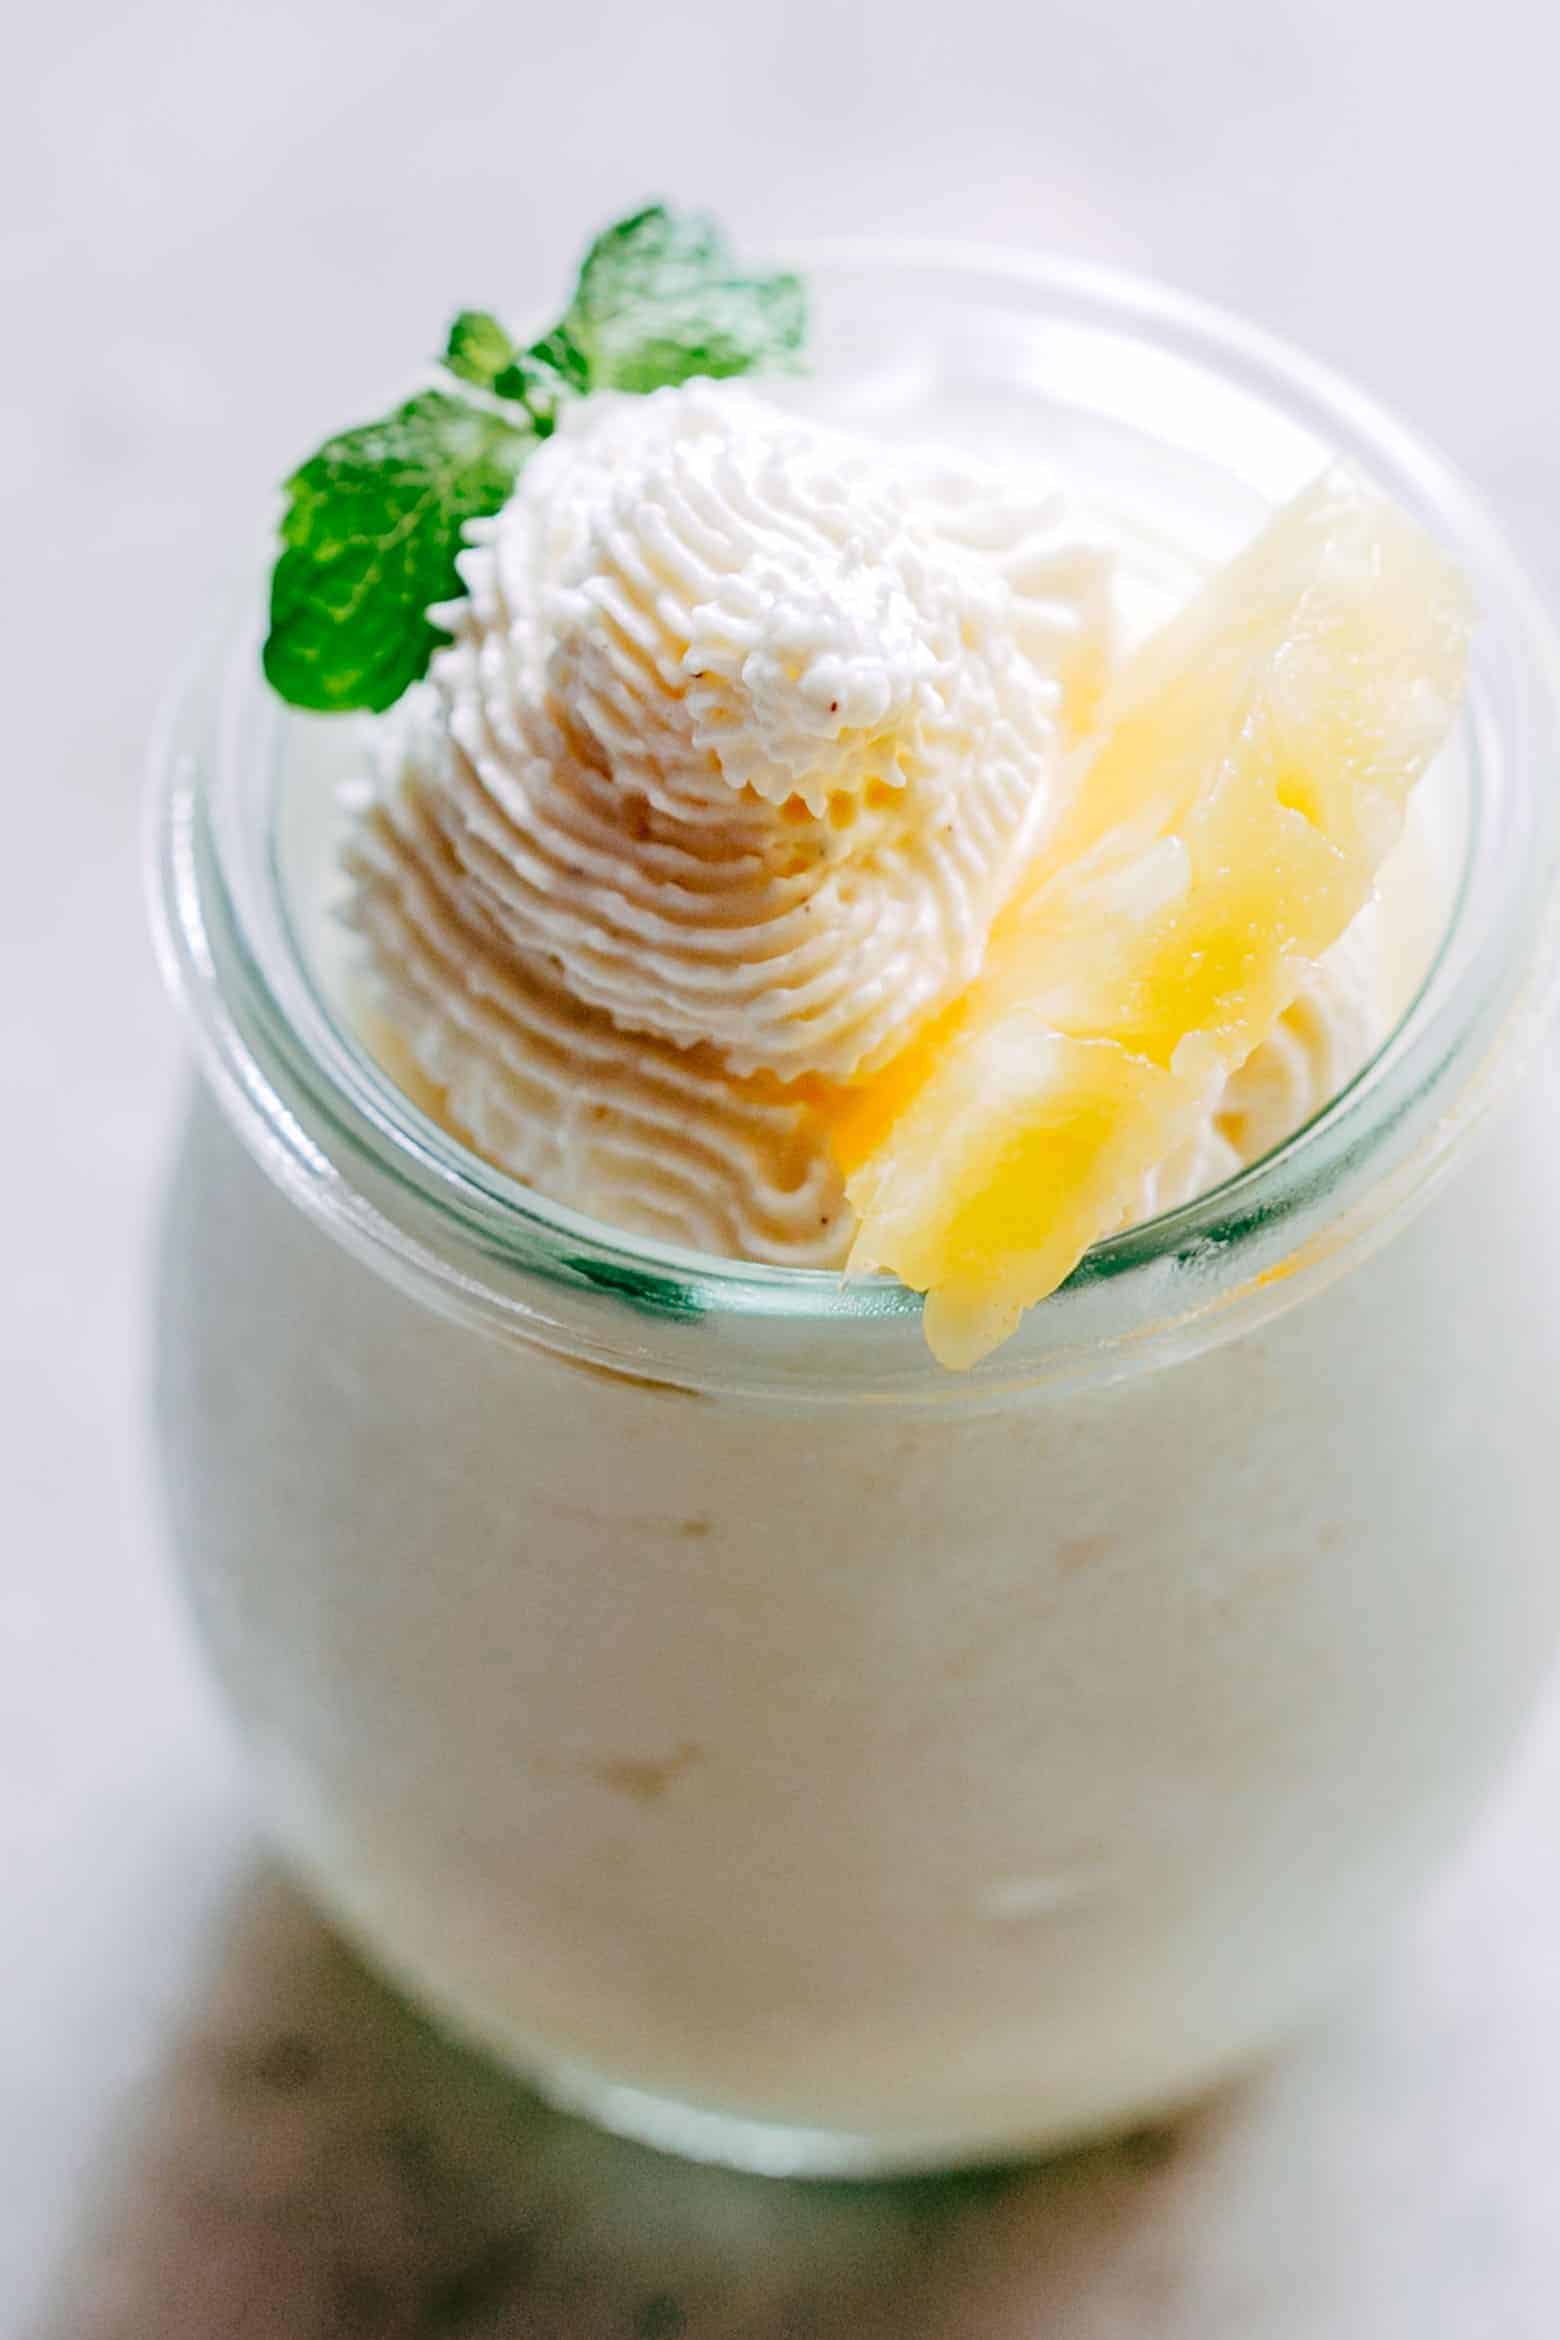 Easy eggless pineapple mousse is a delicious, make ahead dessert that will be a crowd pleaser! With minimum prep, these pineapple mousse cups are ready in minutes and have a gorgeous creamy texture.